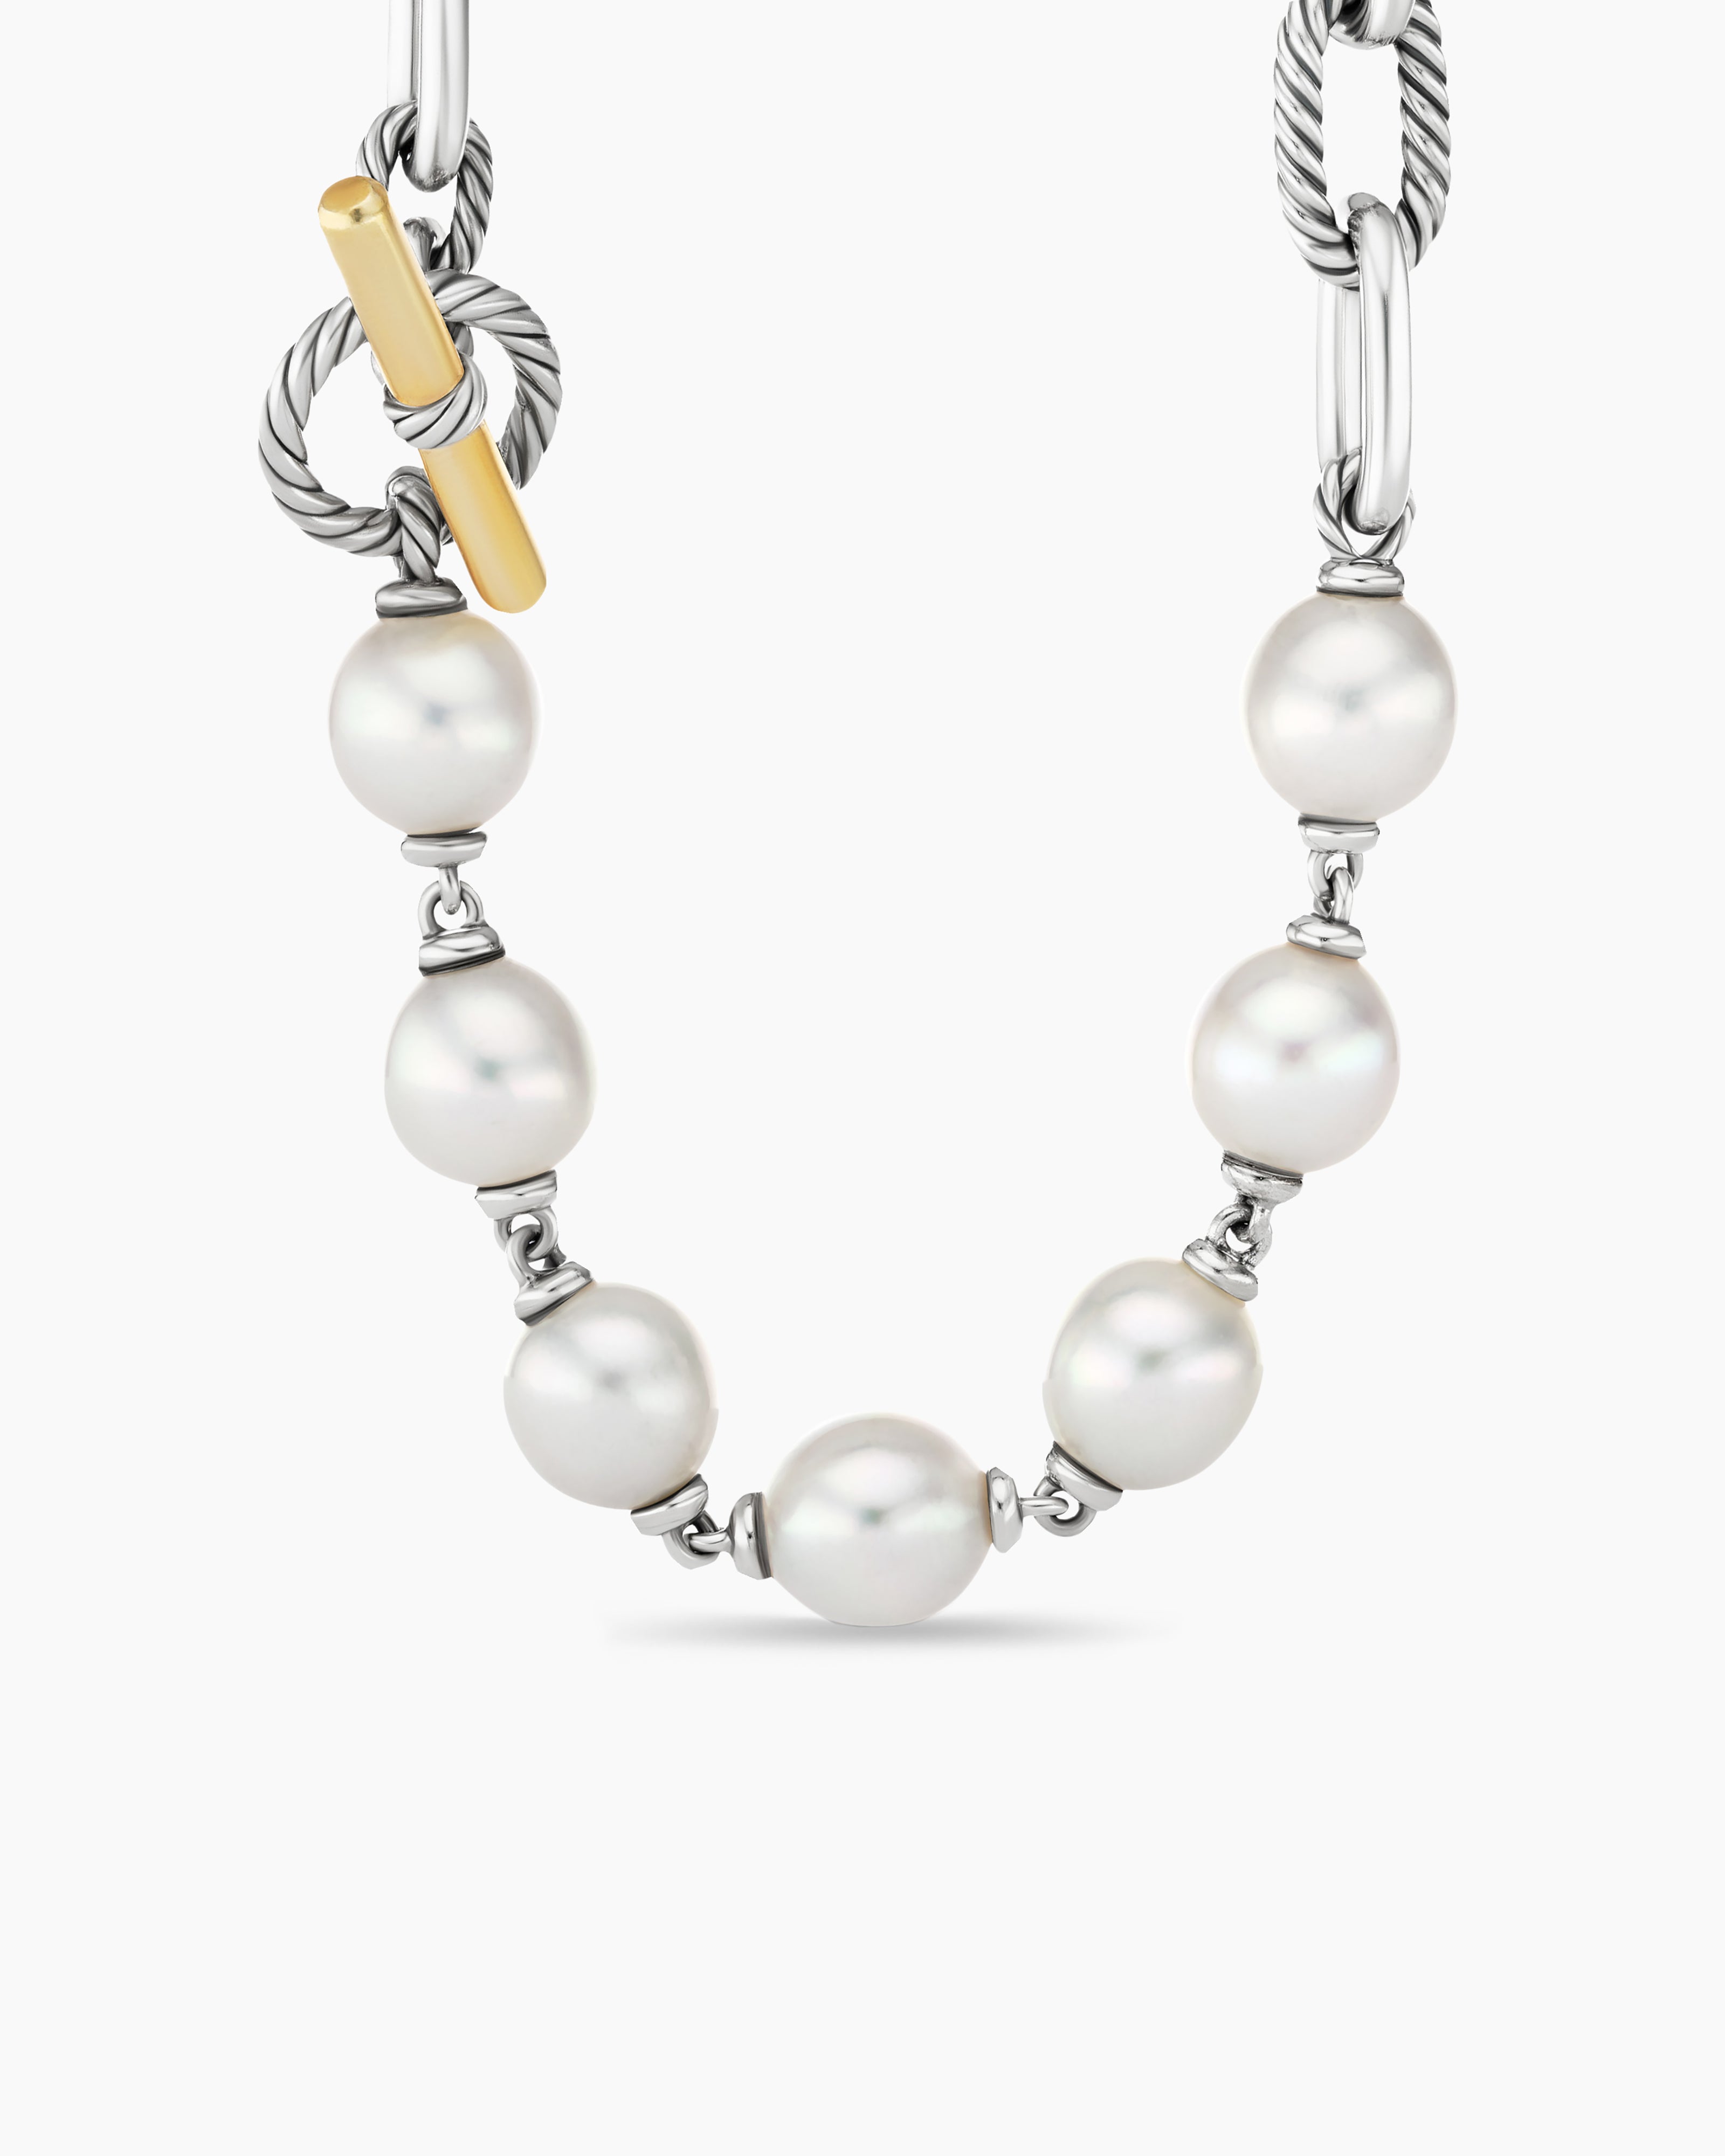 DY Madison® Pearl Chain Necklace in Sterling Silver with 18K Yellow Gold  and Pearls, 11mm | David Yurman